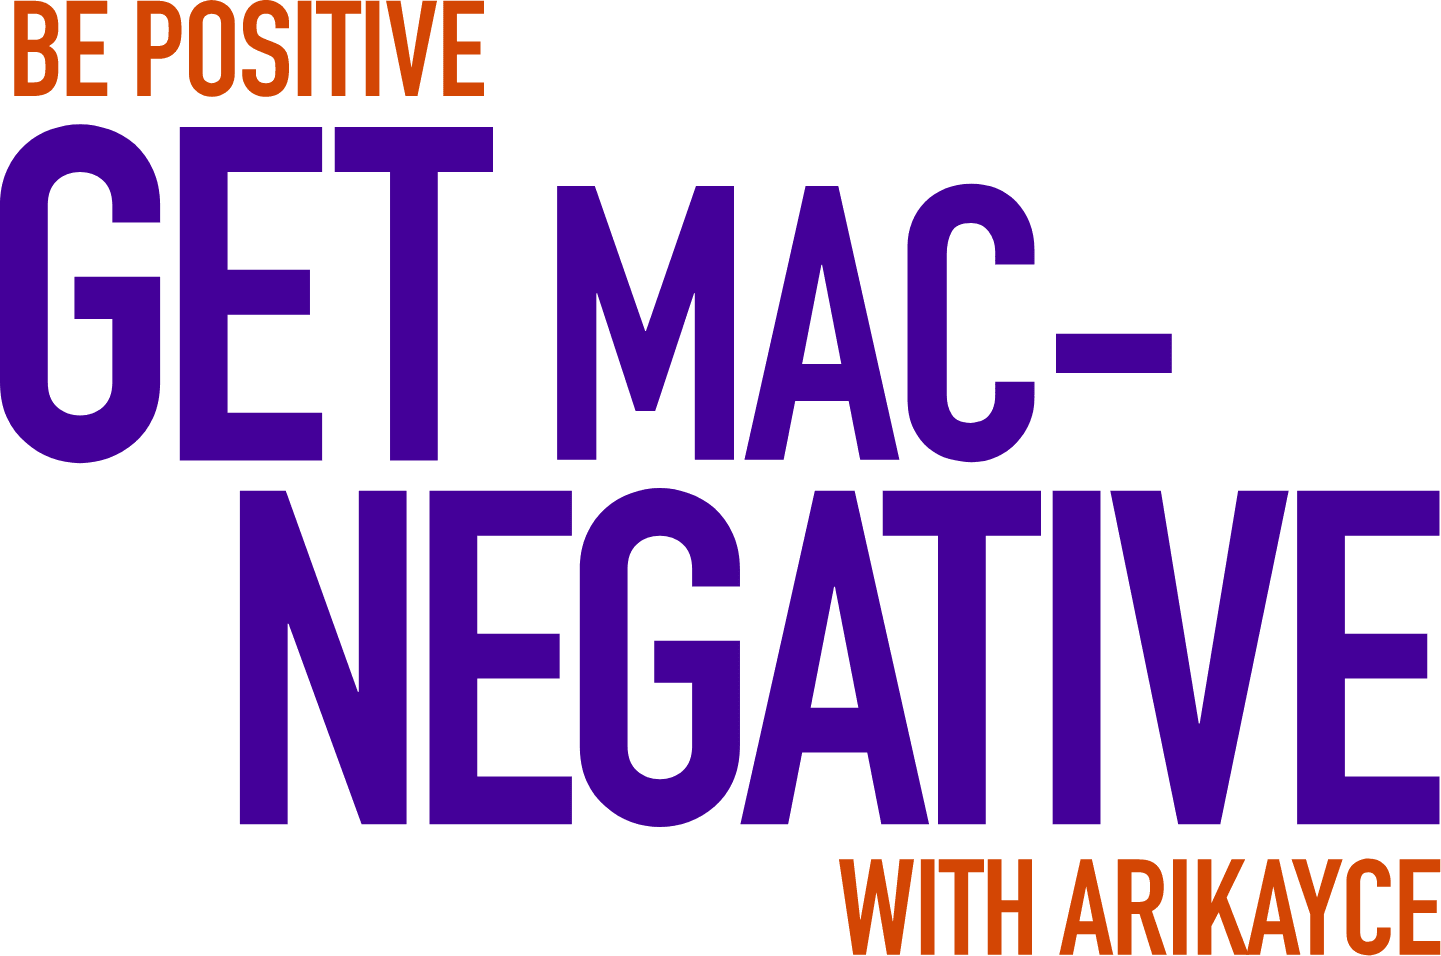 Be Positive Get MAC-Negative with ARIKAYCE